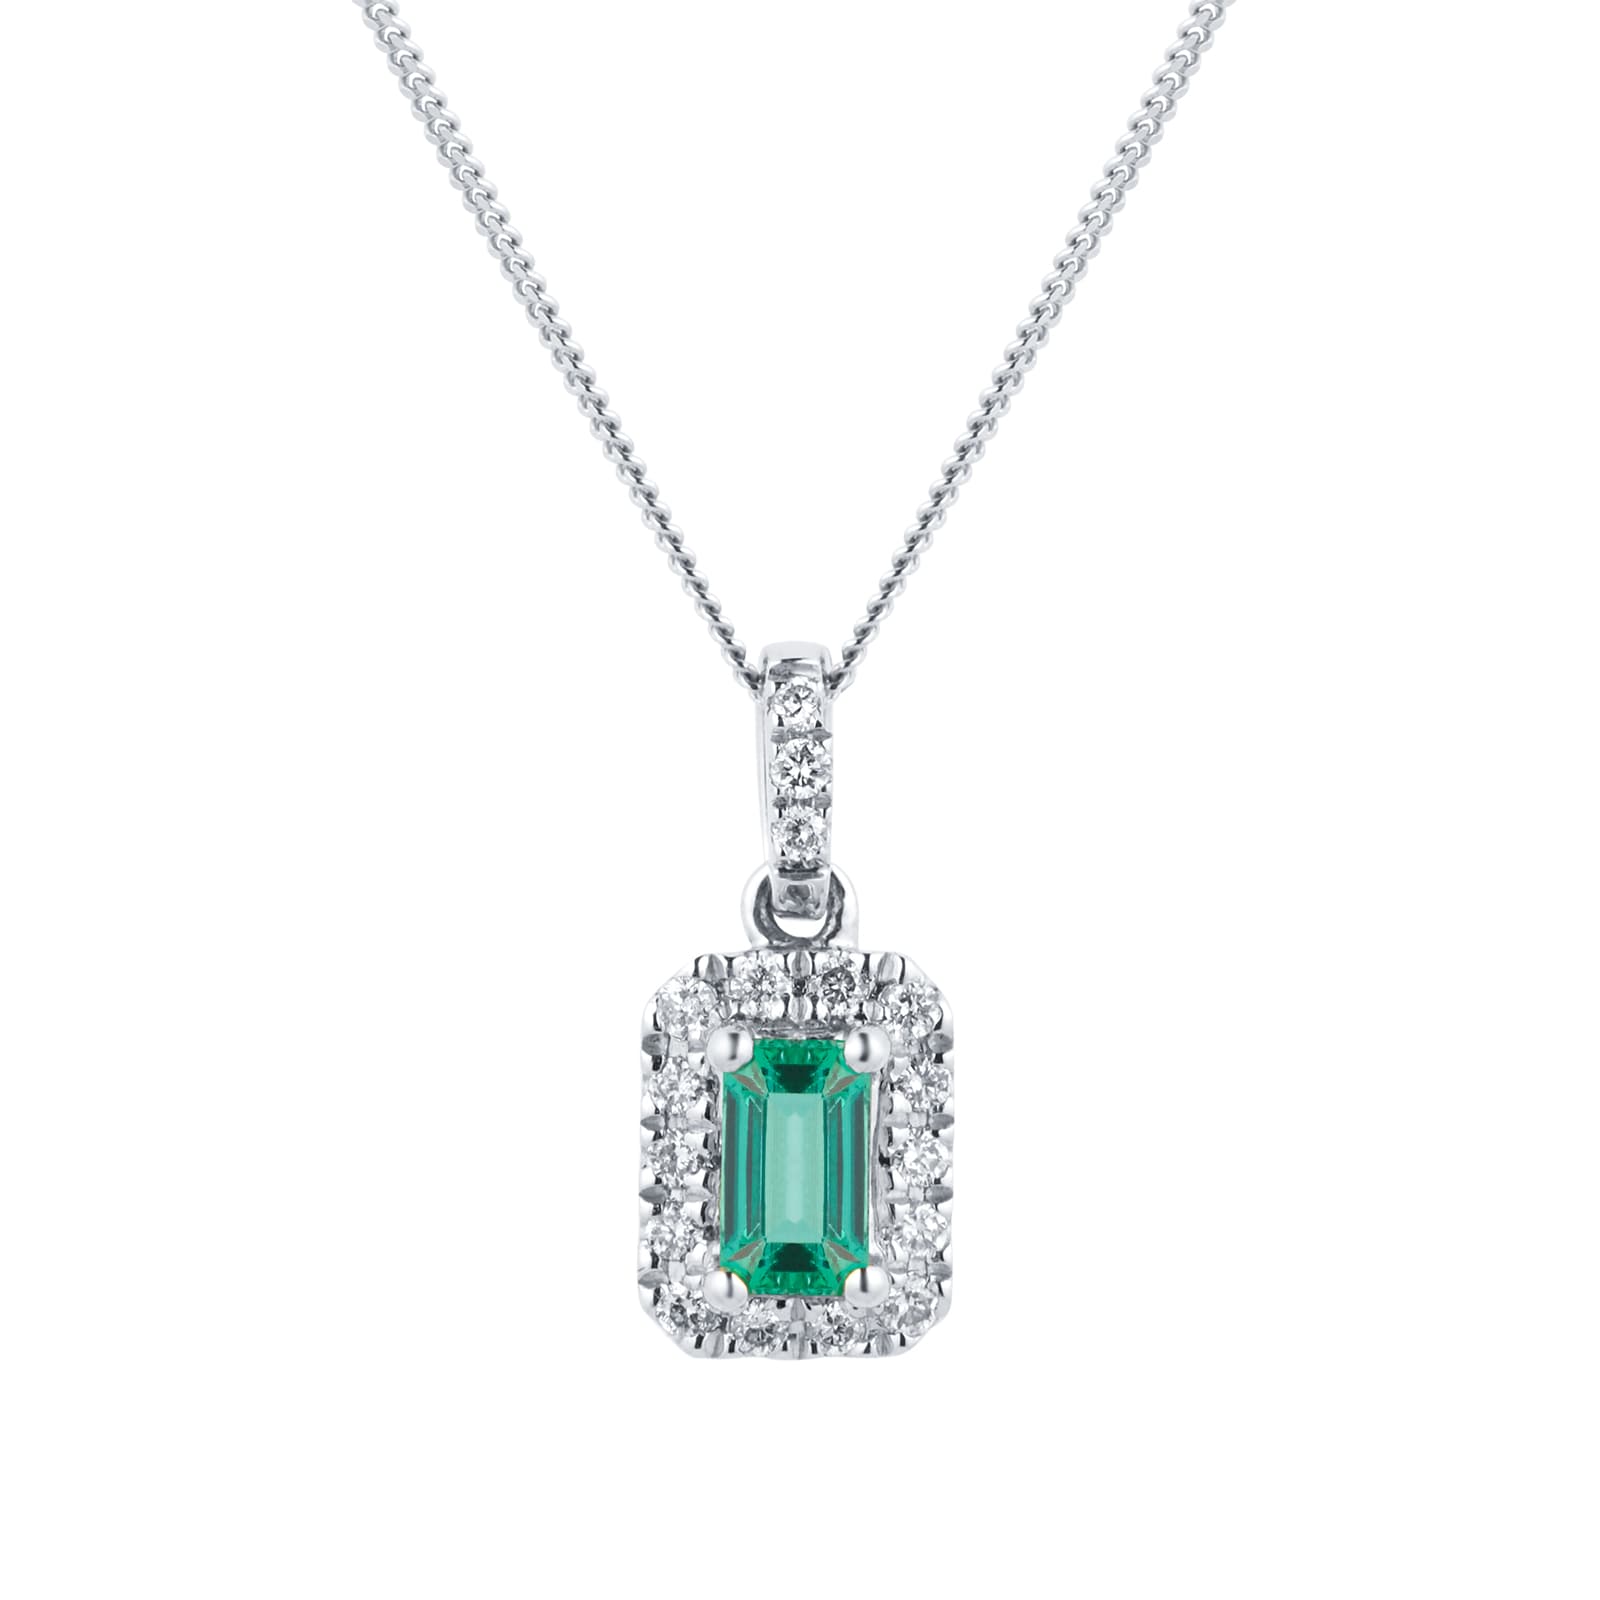 Emerald and Diamond Necklace, 18K White Gold Necklace Chain, May Gemstone  Gift, Unique Fine Jewelry